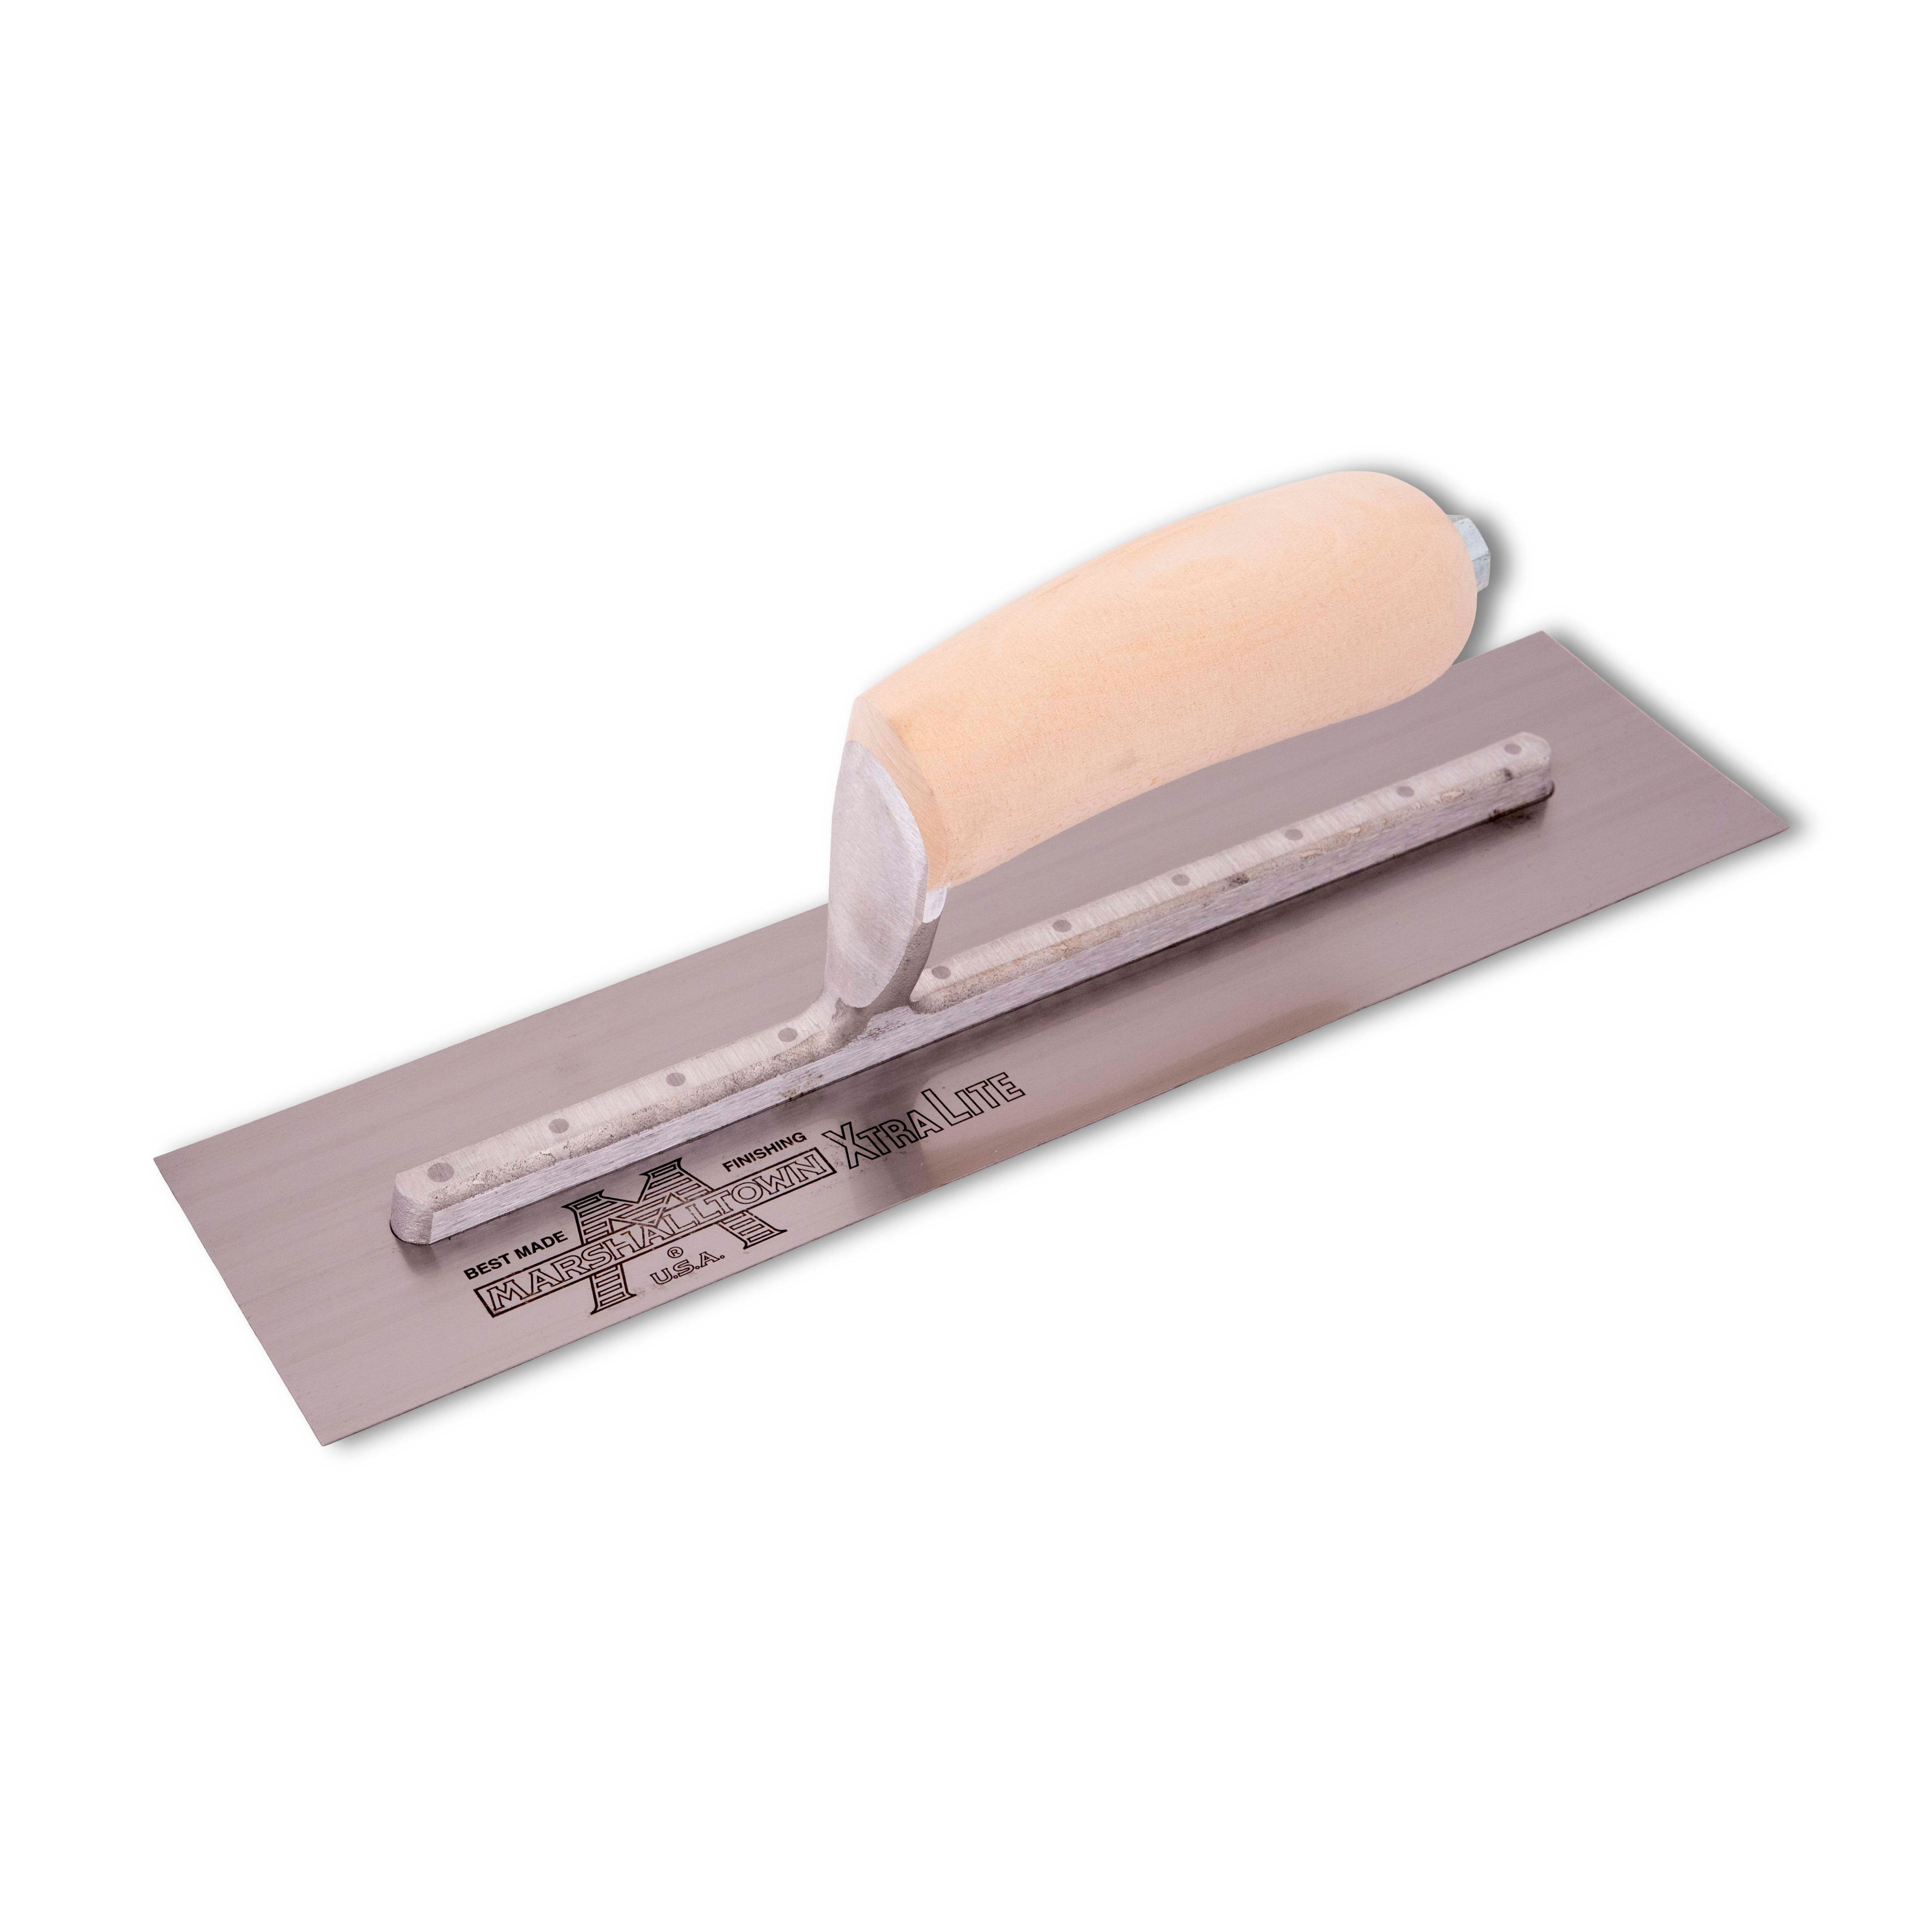 Marshalltown MXS62 12in. x 4in. Finishing Trowel Curved Wood Handle MAT-MXS62